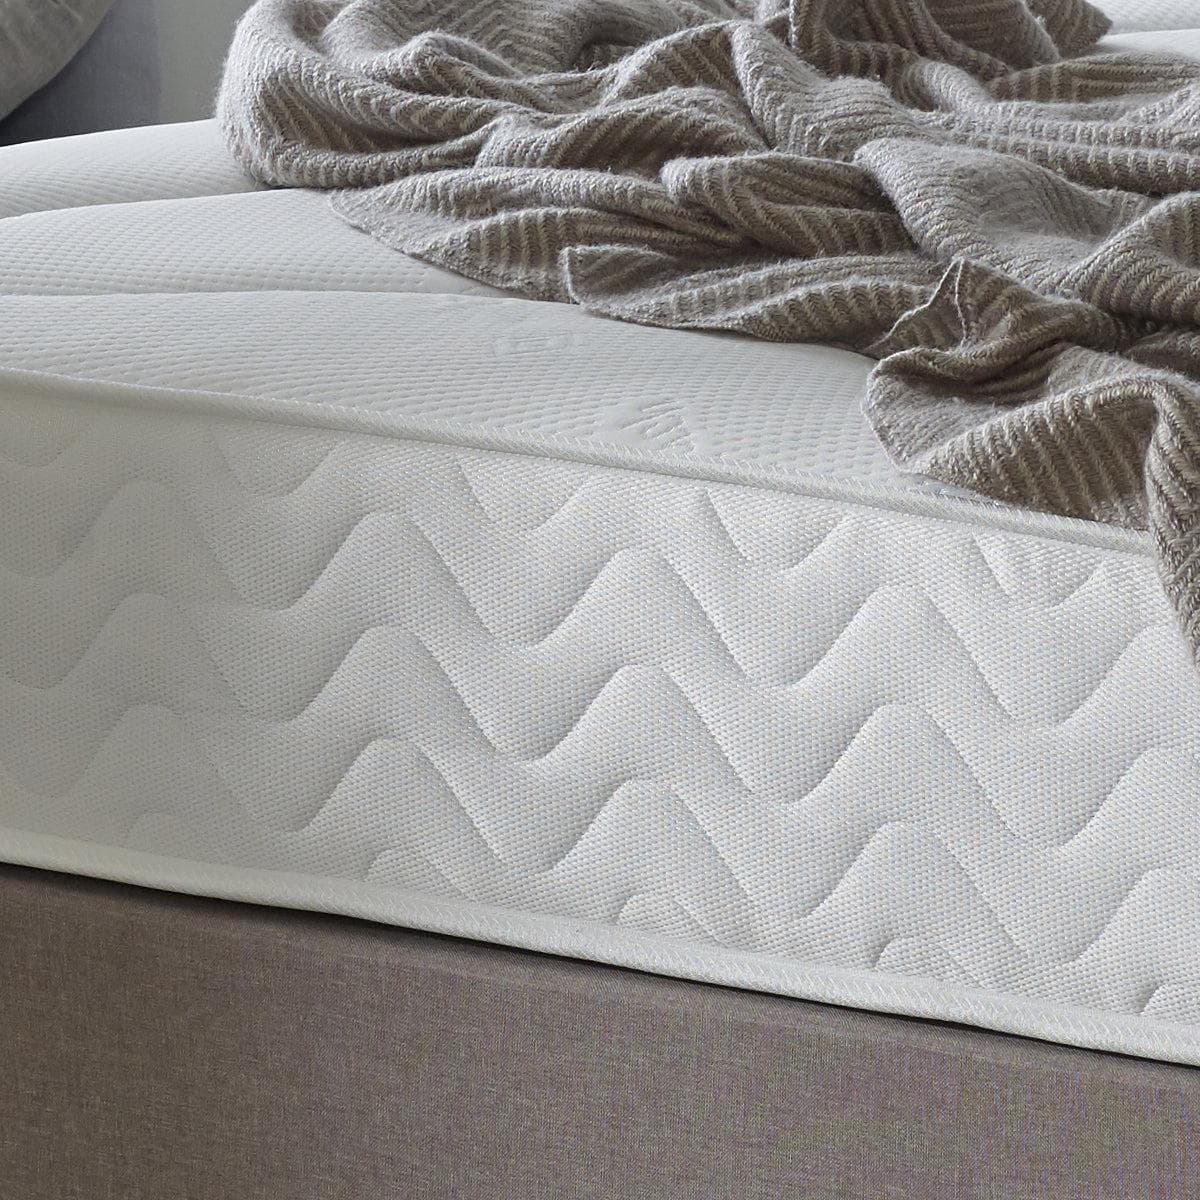 Dura Beds Roma Deluxe Super Orthopaedic Sprung Mattress